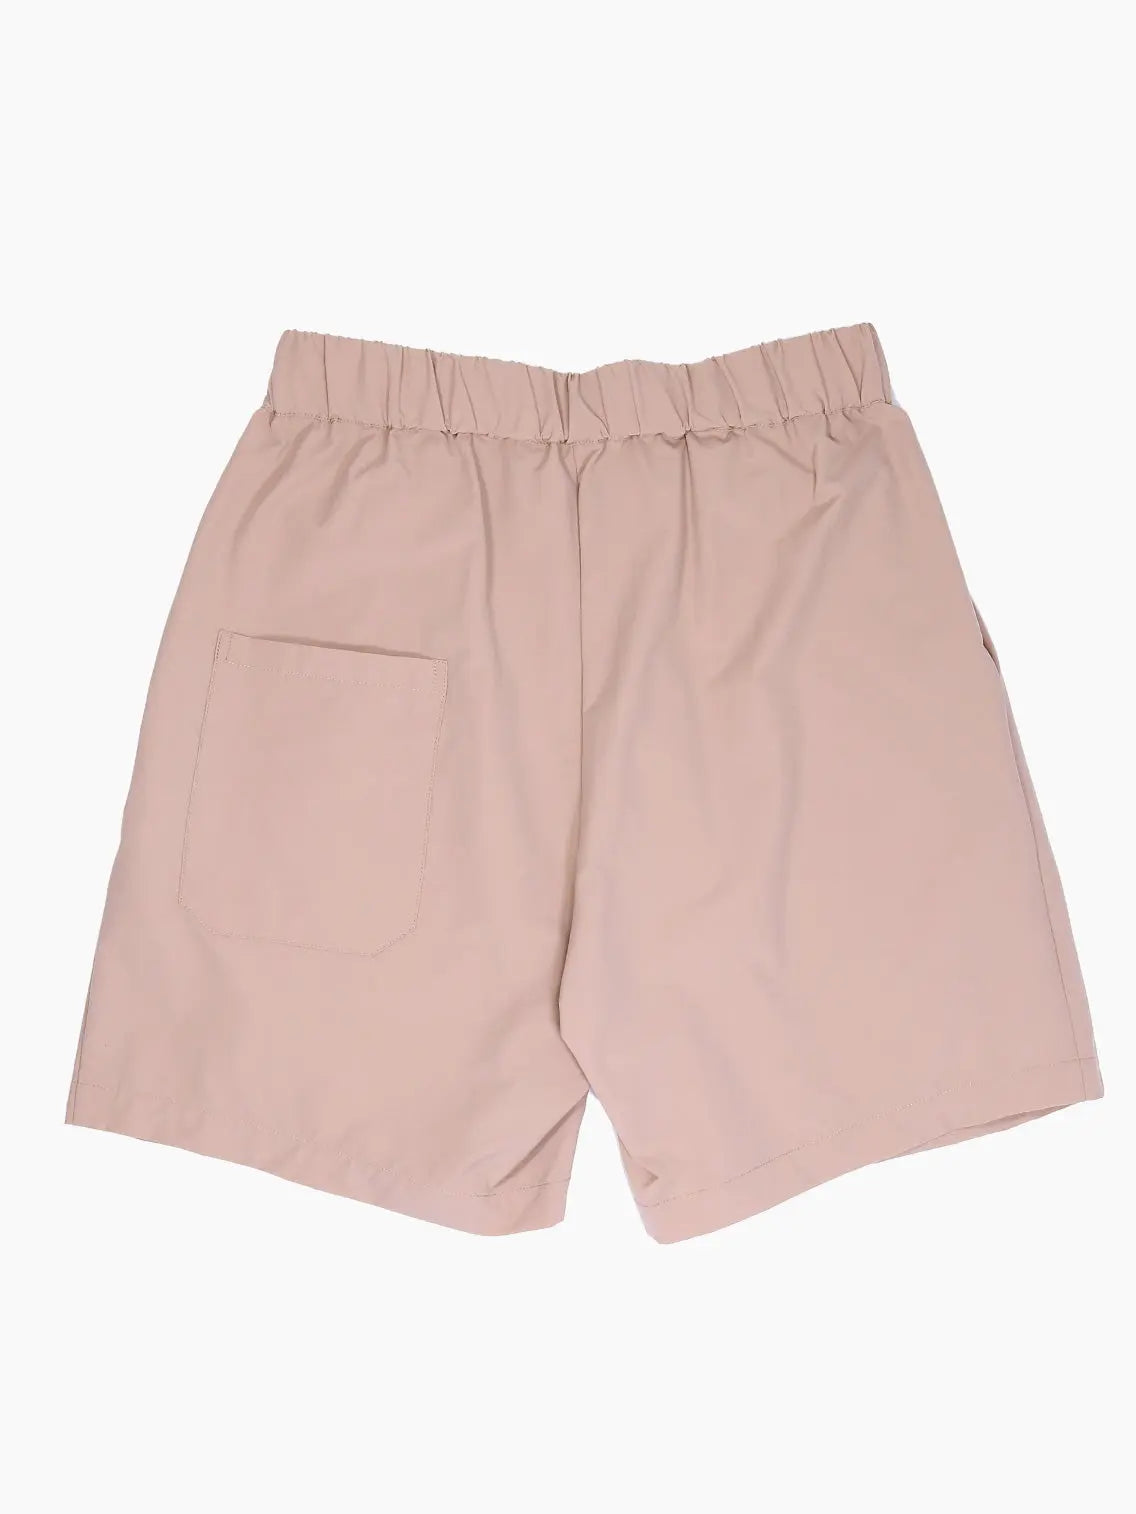 A pair of blush pink shorts with an elastic waistband and pleated front. The shorts are made from a light, flowy fabric and have a relaxed fit, perfect for casual wear. Discover Mundaka's Oversized Bermuda Beige at our Barcelona store for a chic addition to your wardrobe.